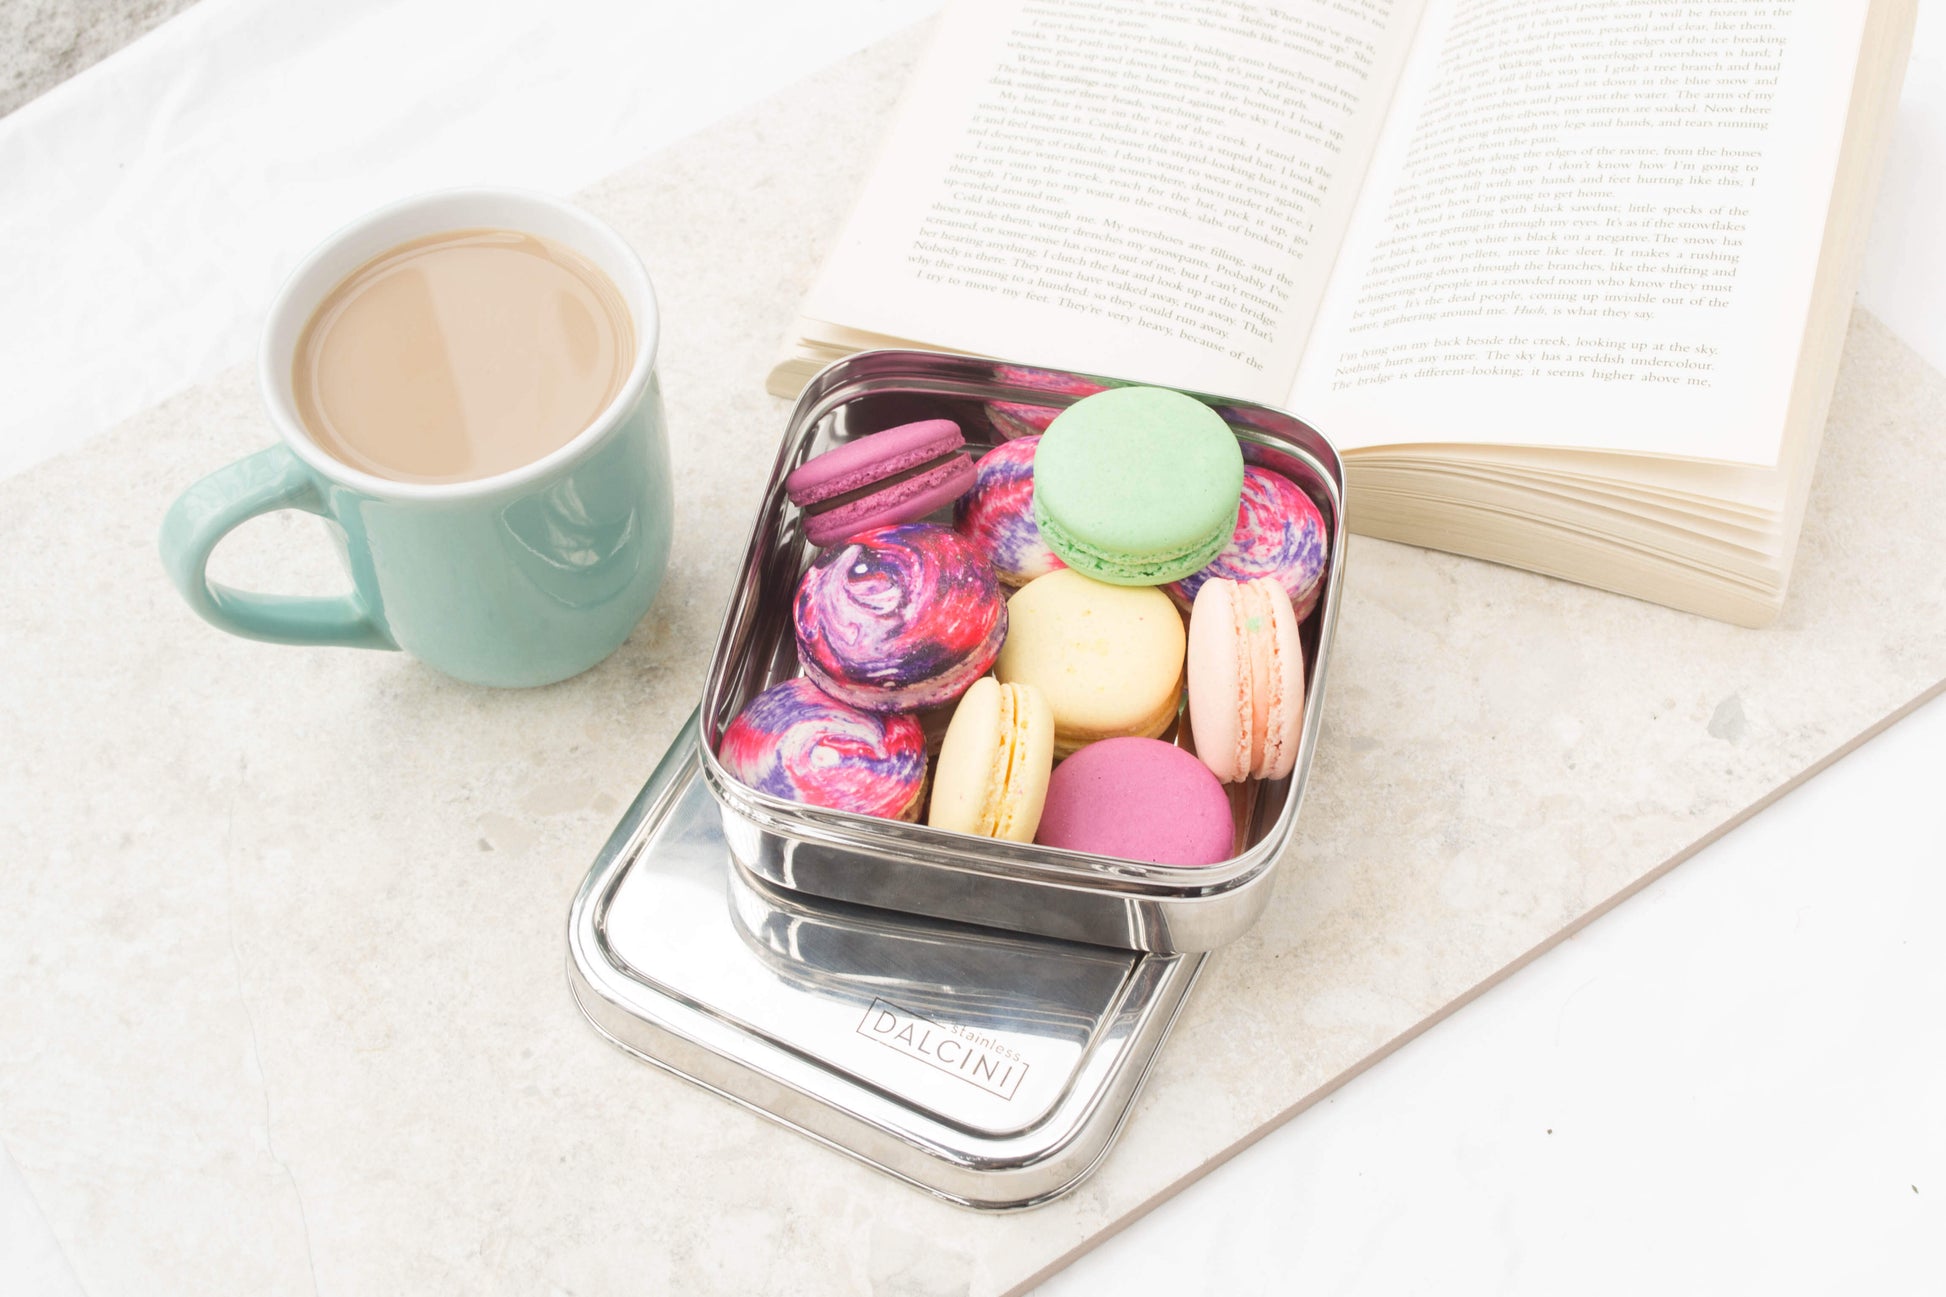 Mug of tea next to an open book and square stainless steel sandwich box filled with French macarons